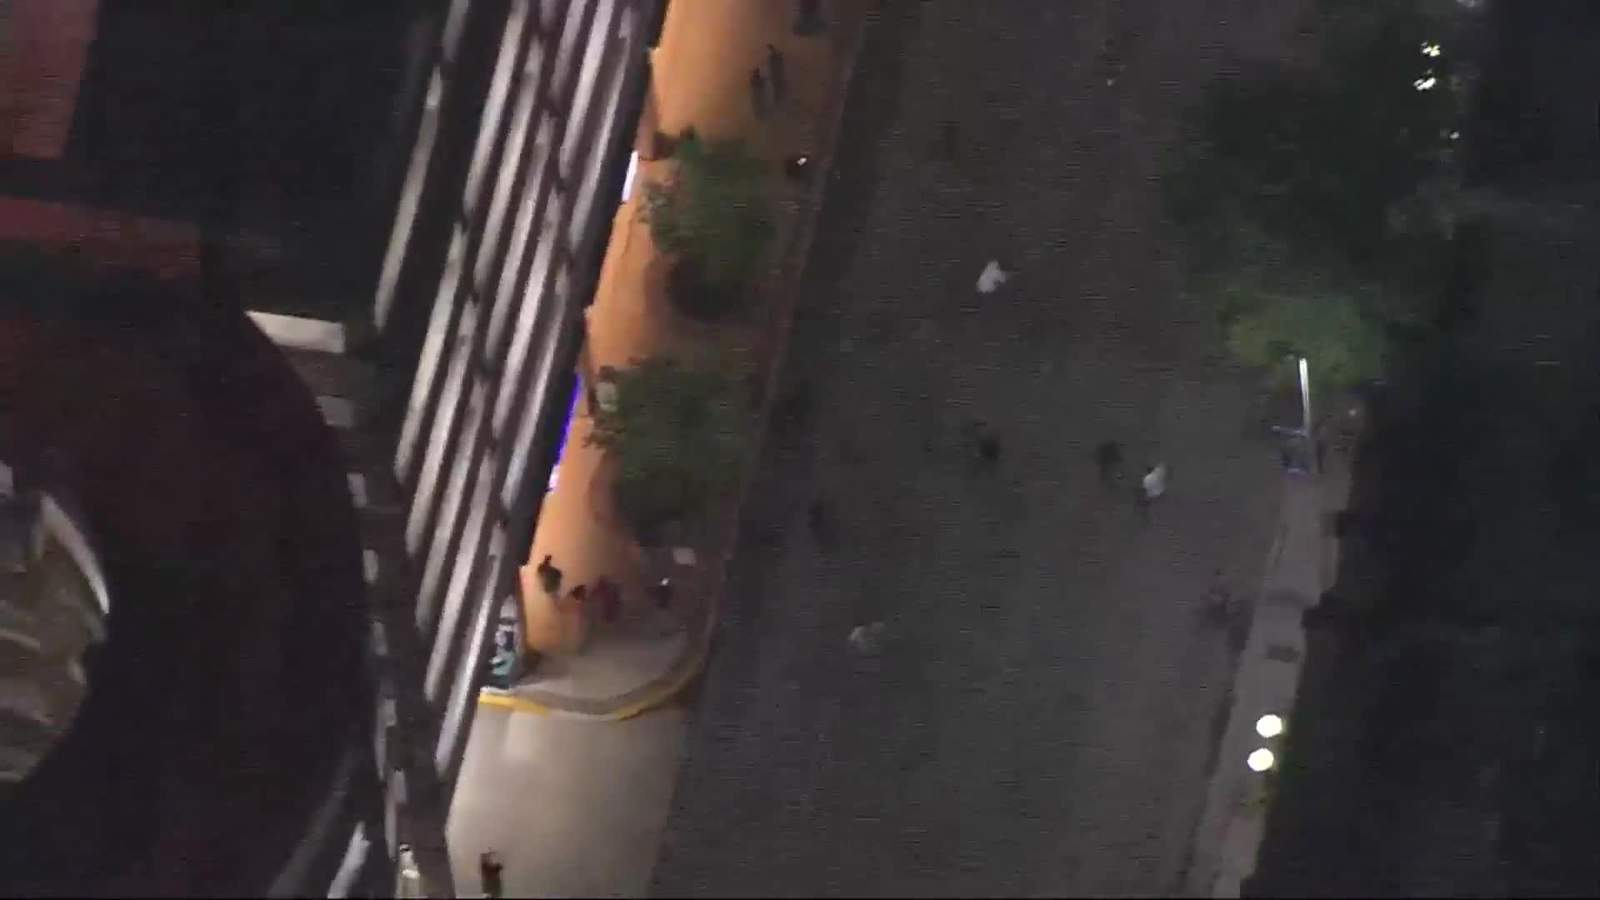 Video shows peaceful protest in downtown San Antonio transform into chaos